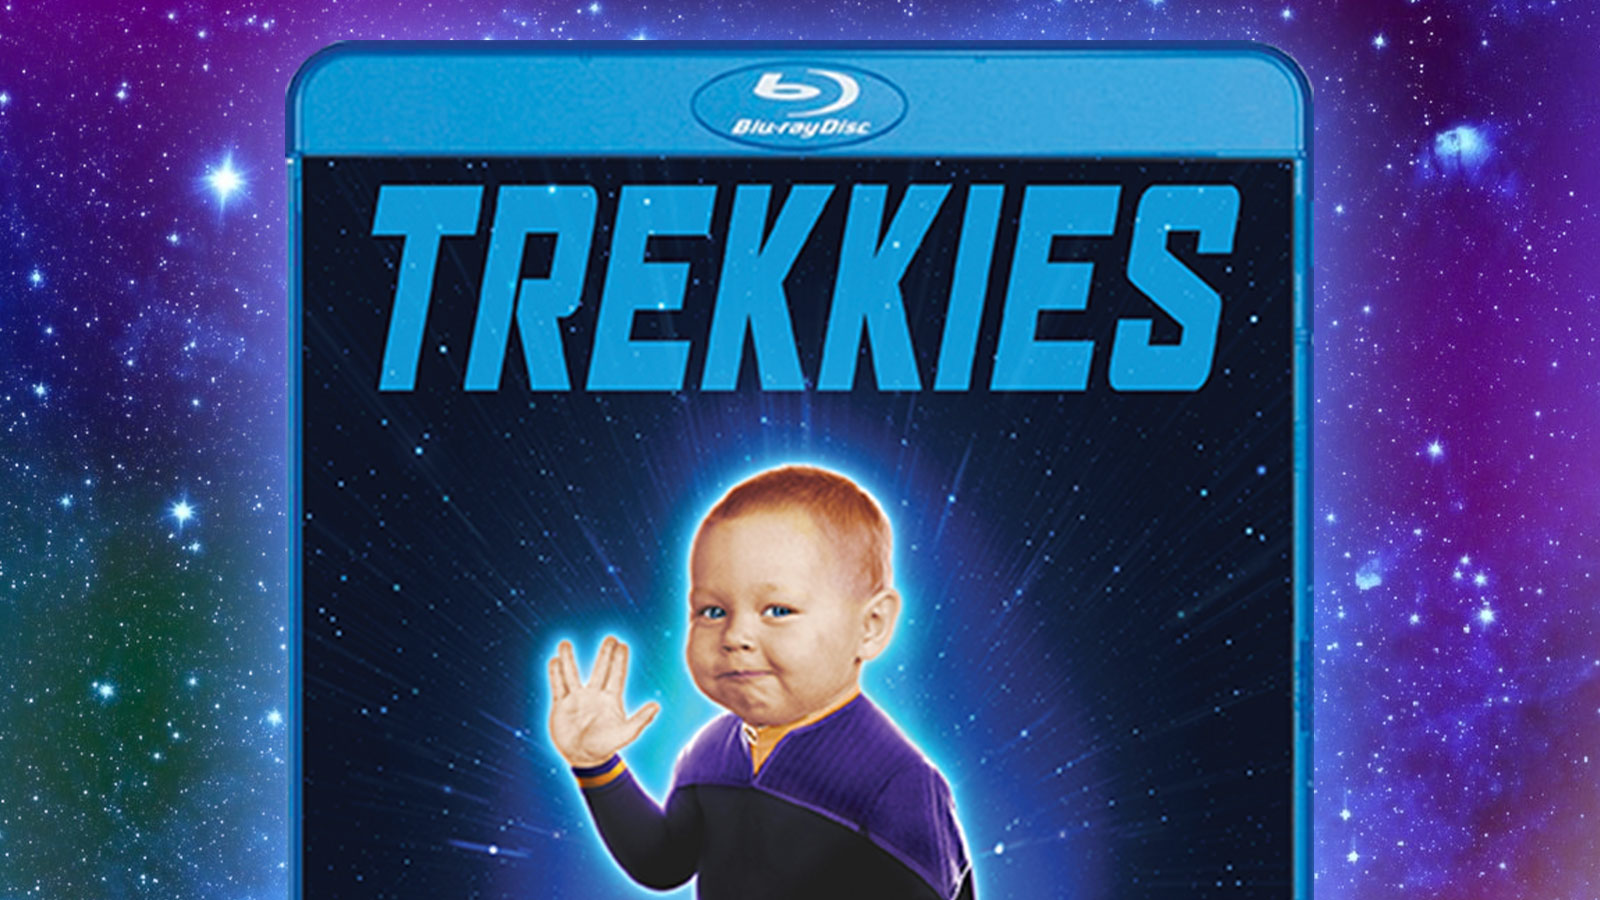 ‘Trekkies’ 25th Anniversary Edition coming to Blu-ray for the first time this May